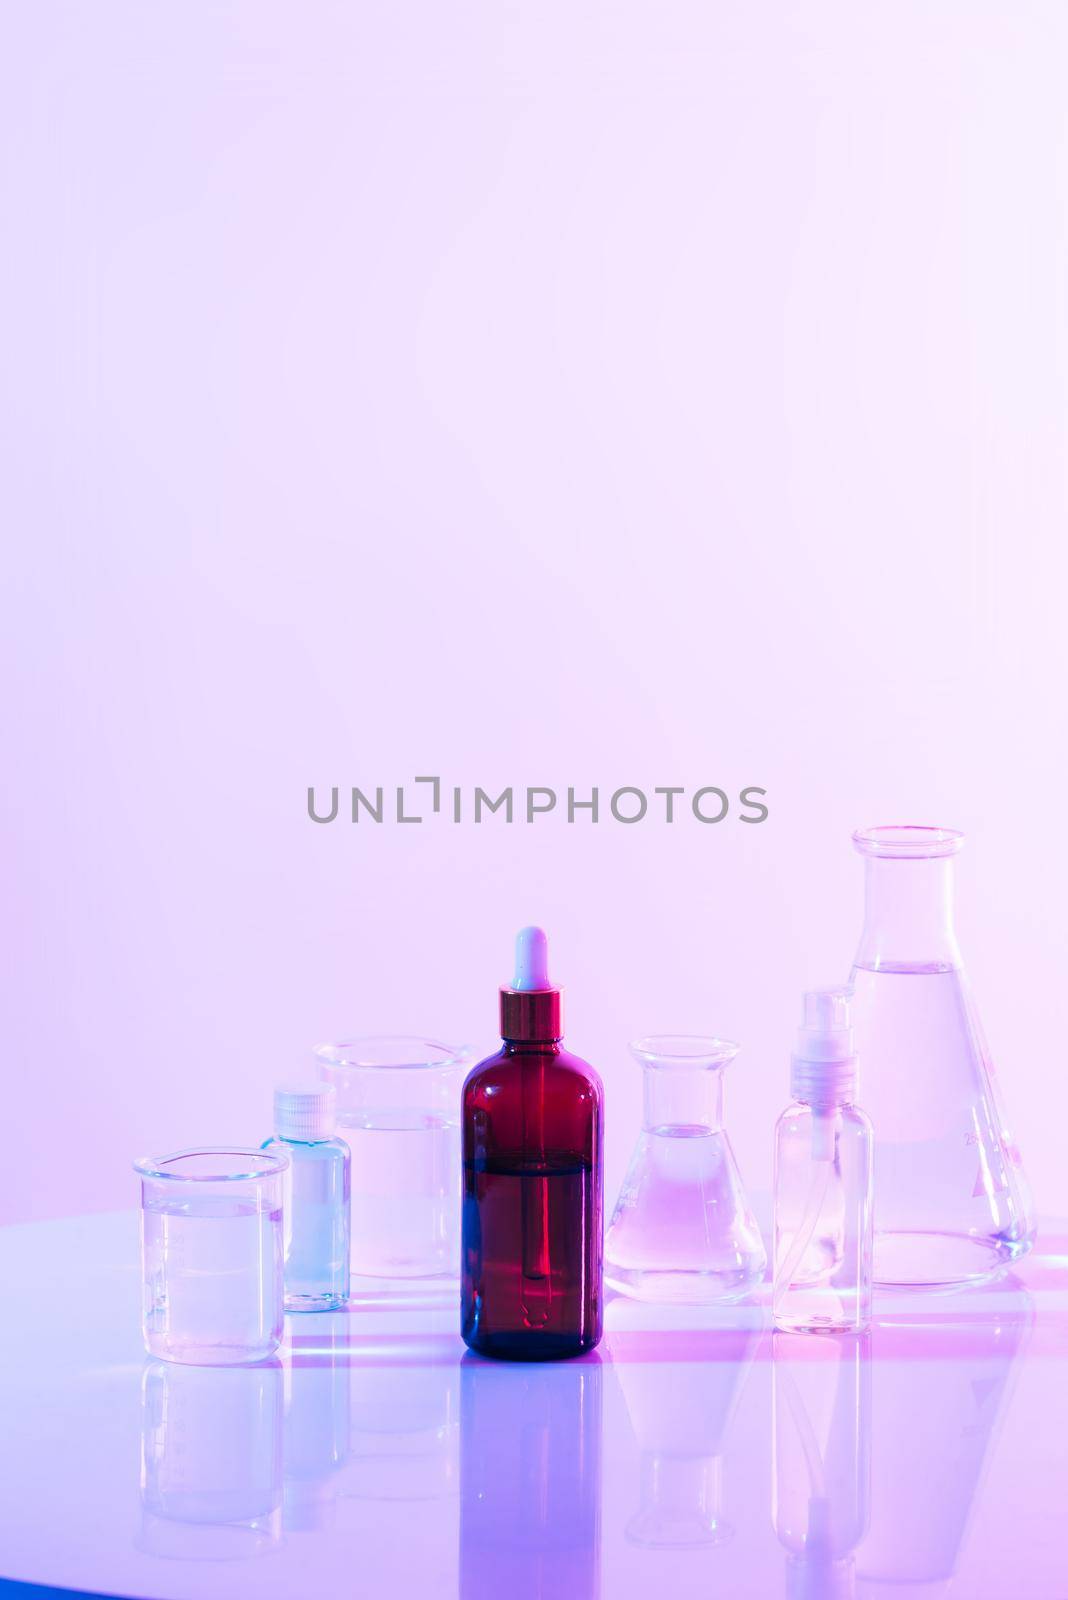 retro brown bottle with flask in science laboratory background  by makidotvn